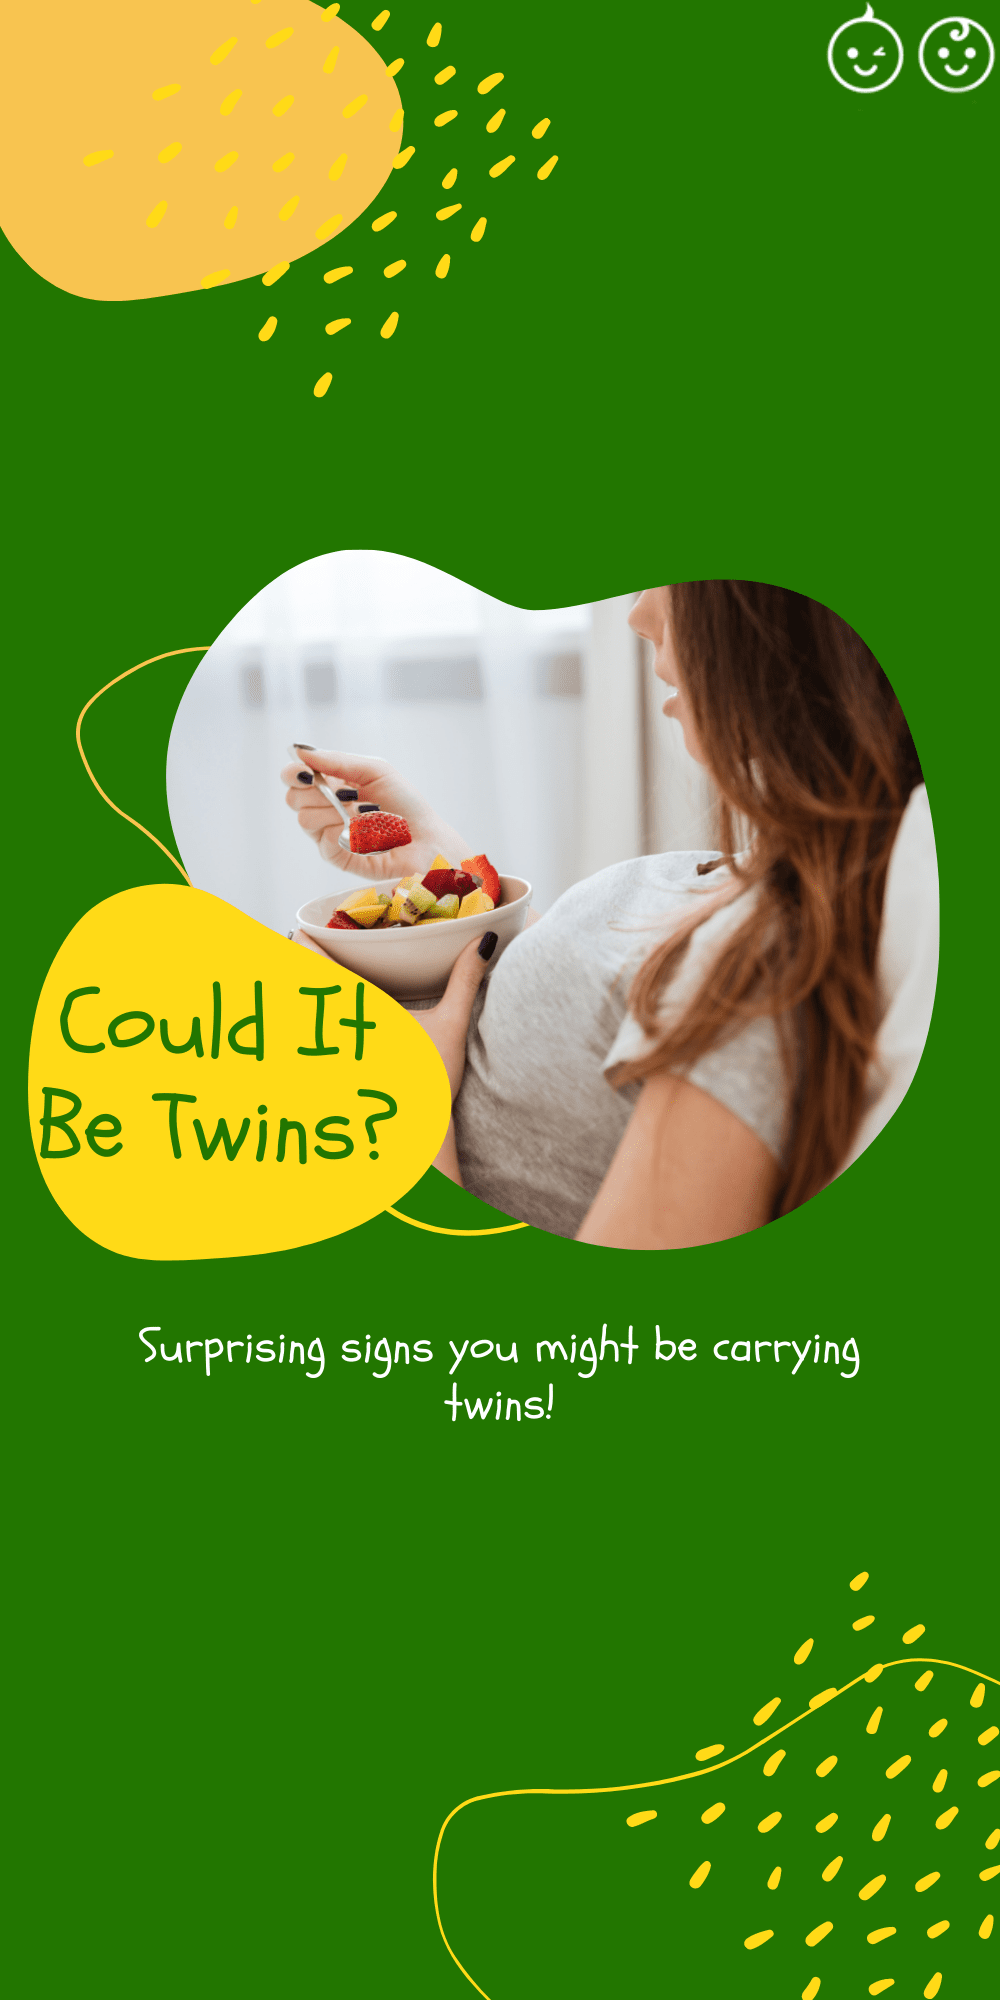 Early Signs Of Your Twin Pregnancy Twiniversity